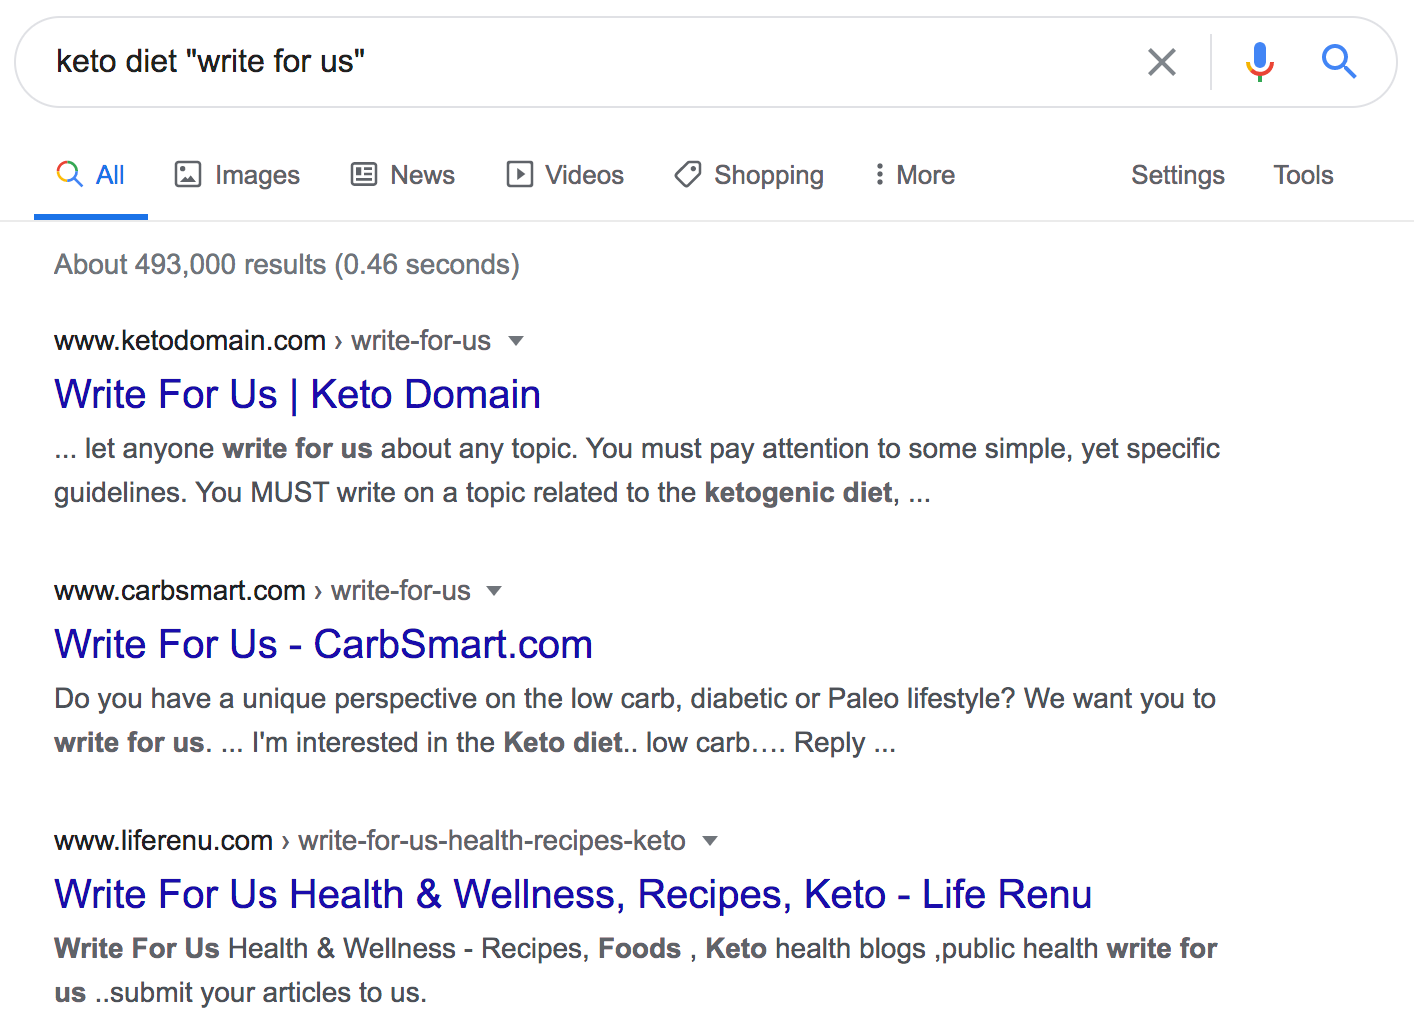 Google search of : Keto diet "write for us"